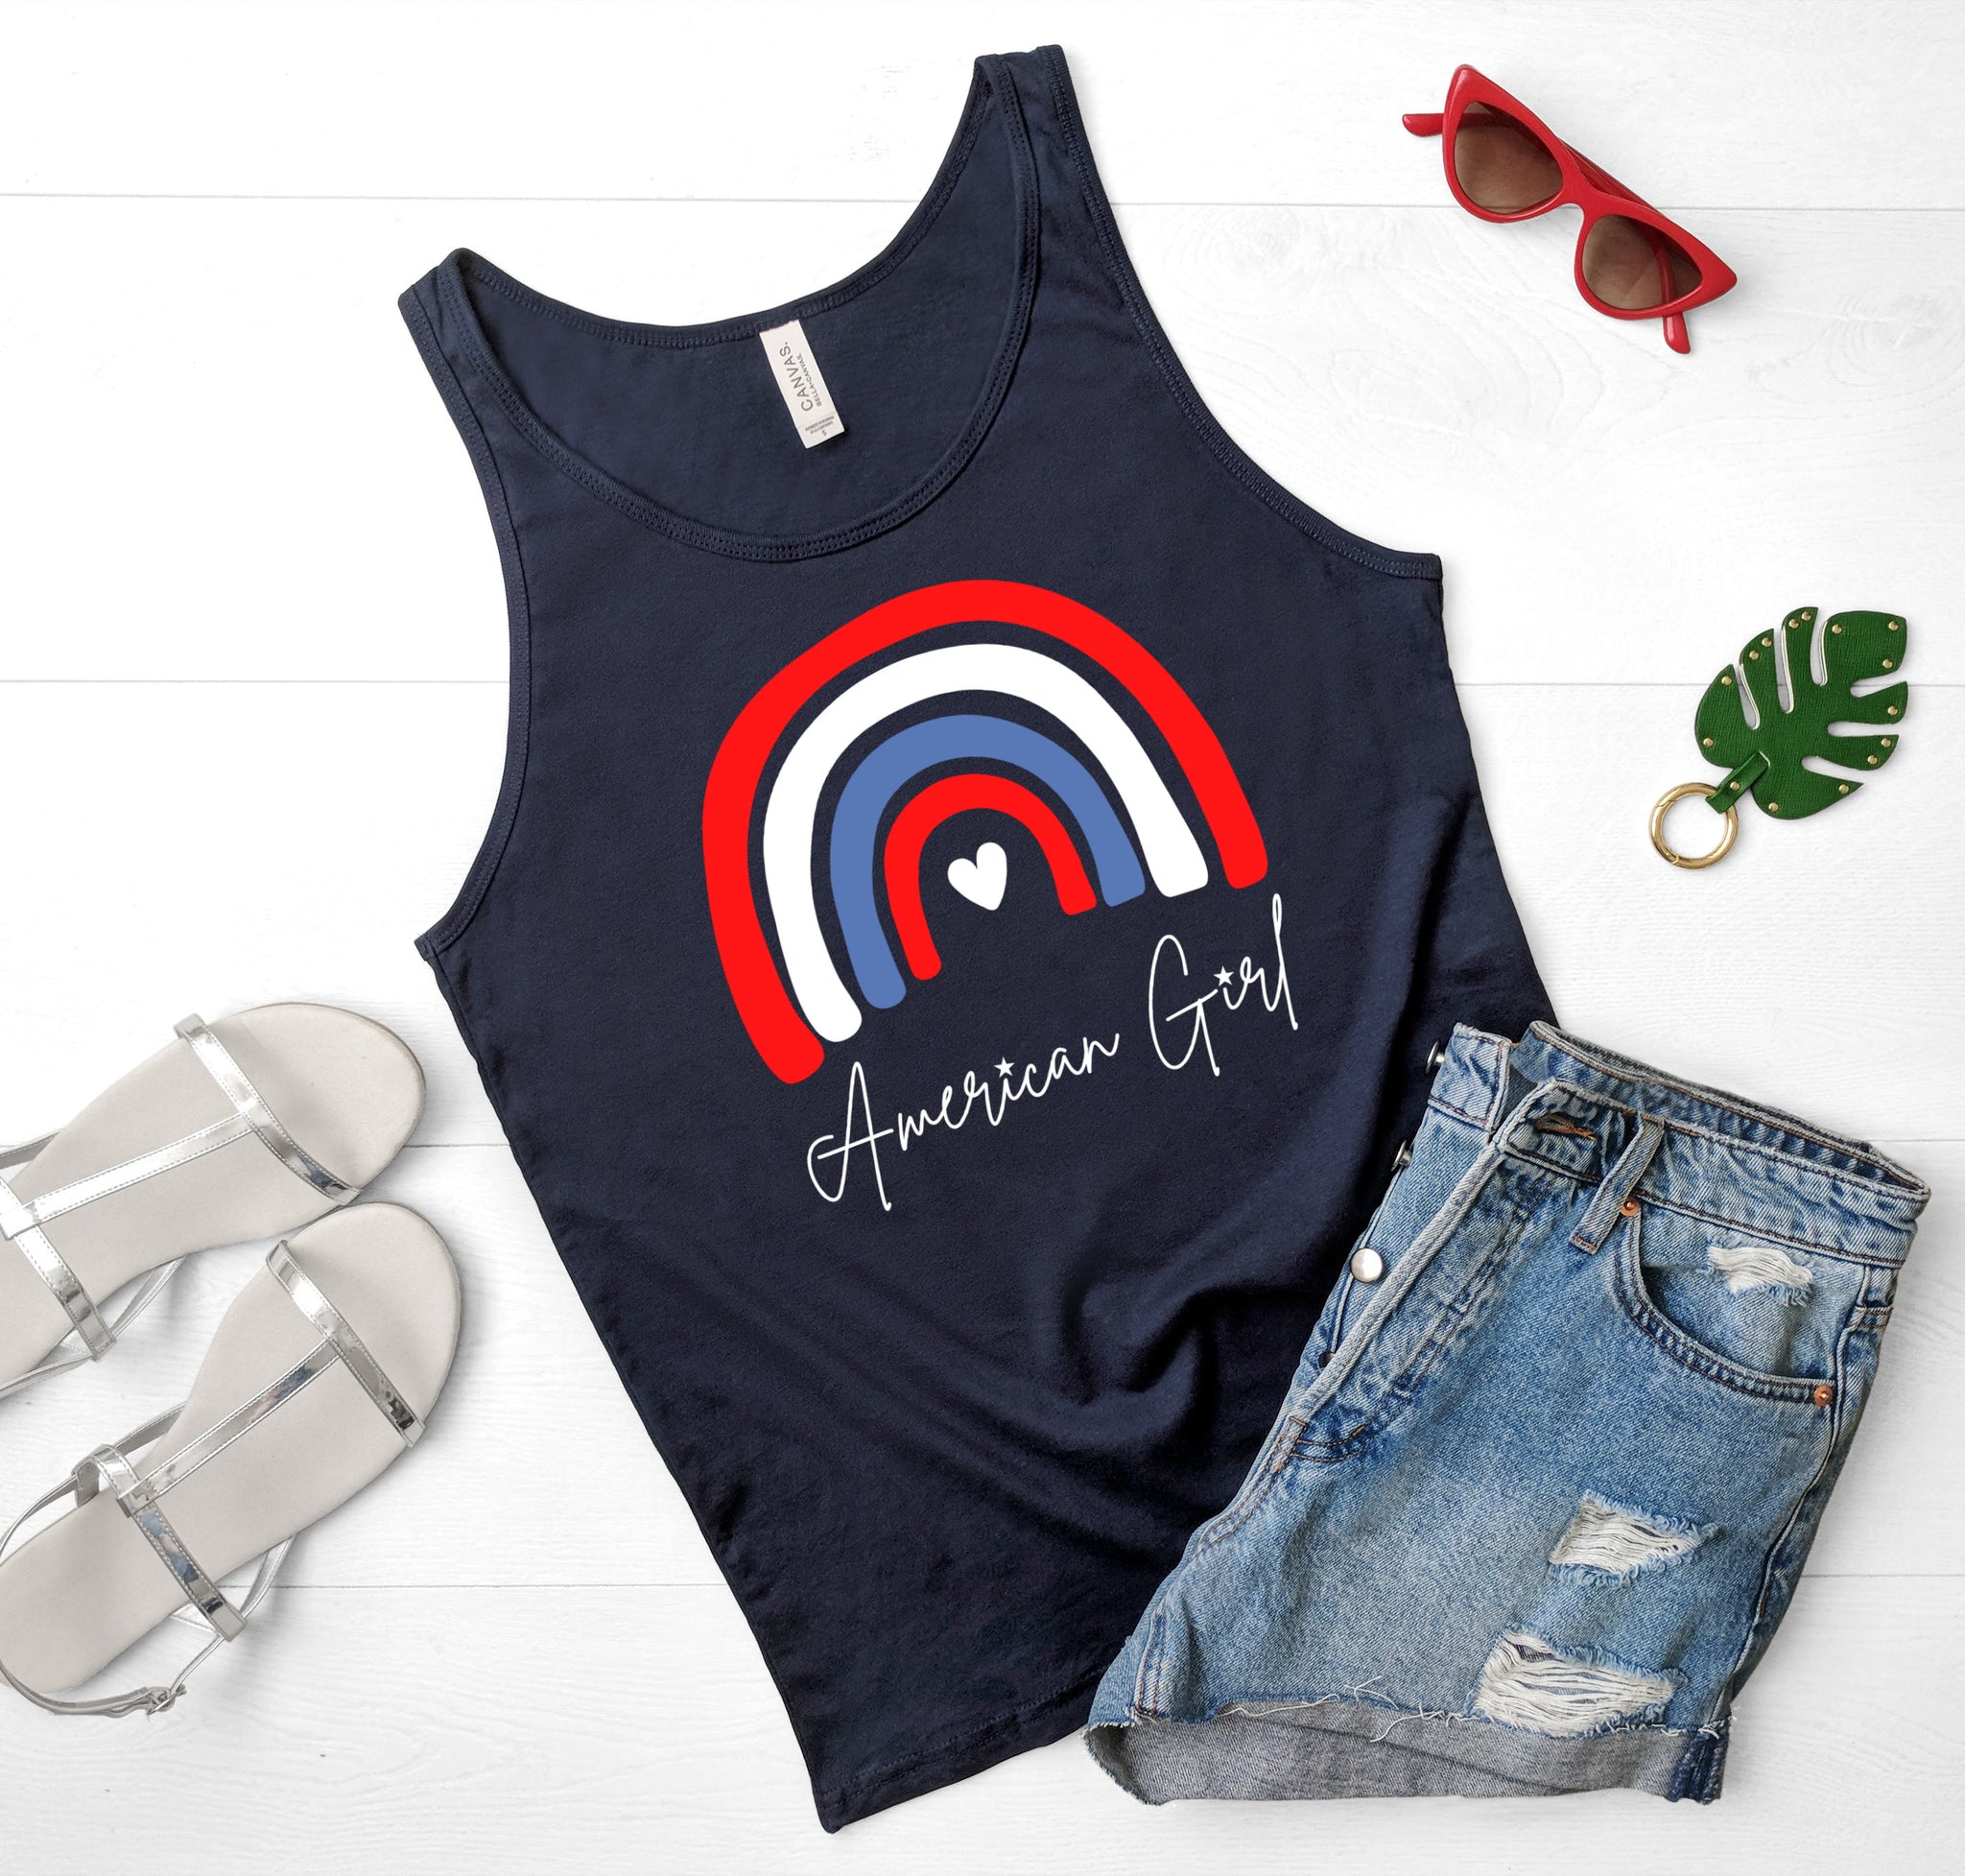 Tall American Girl red, white, and blue rainbow muscle tank top.